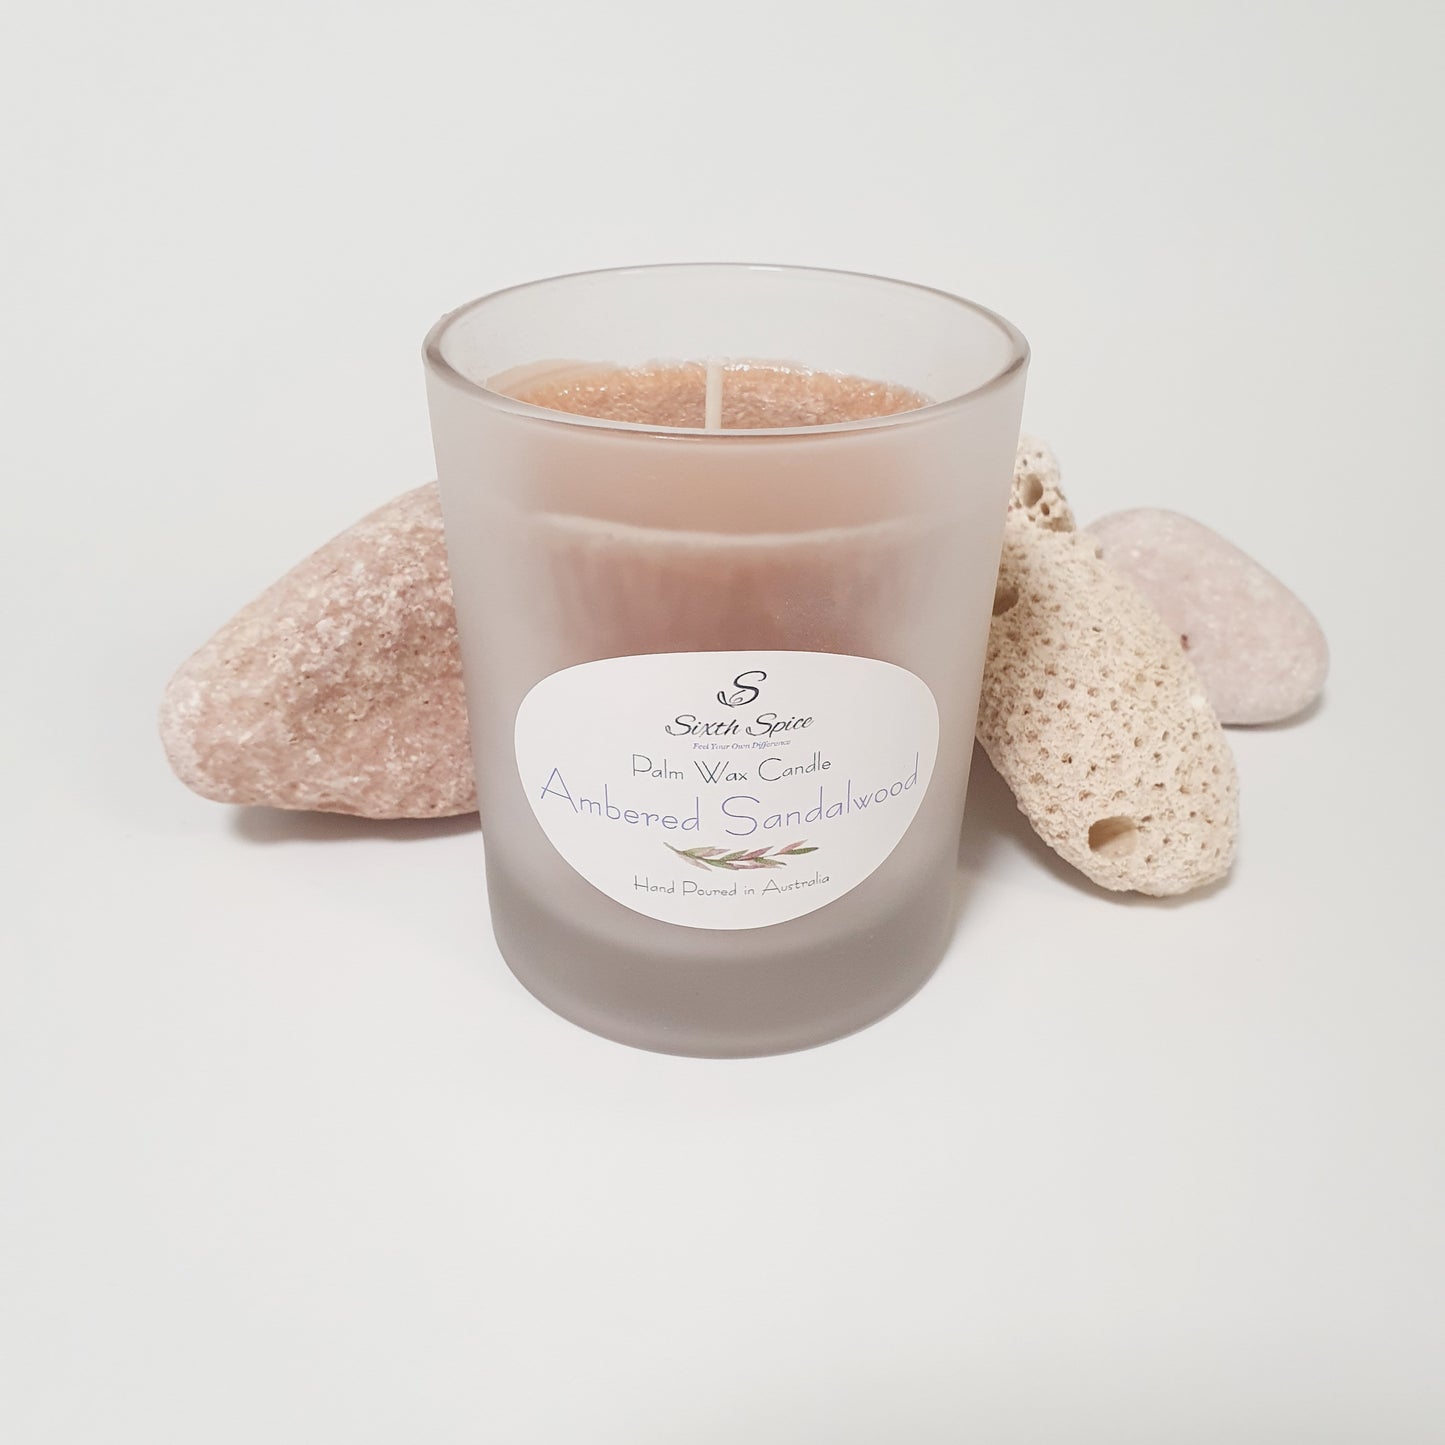 Ambered Sandalwood Scented Large Palm Wax Candle